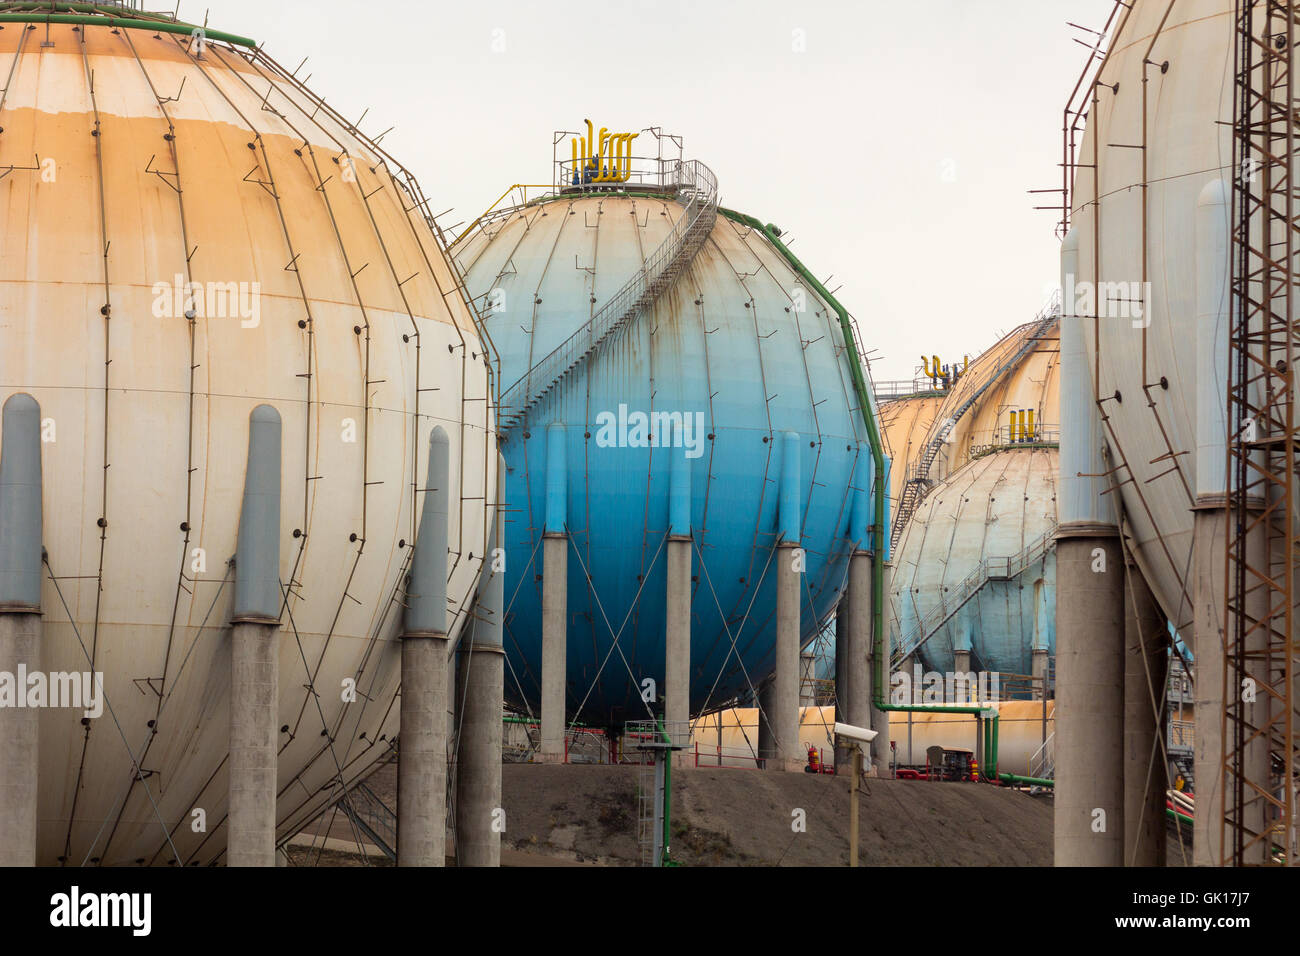 Details of old gas tanks of spherical form Stock Photo